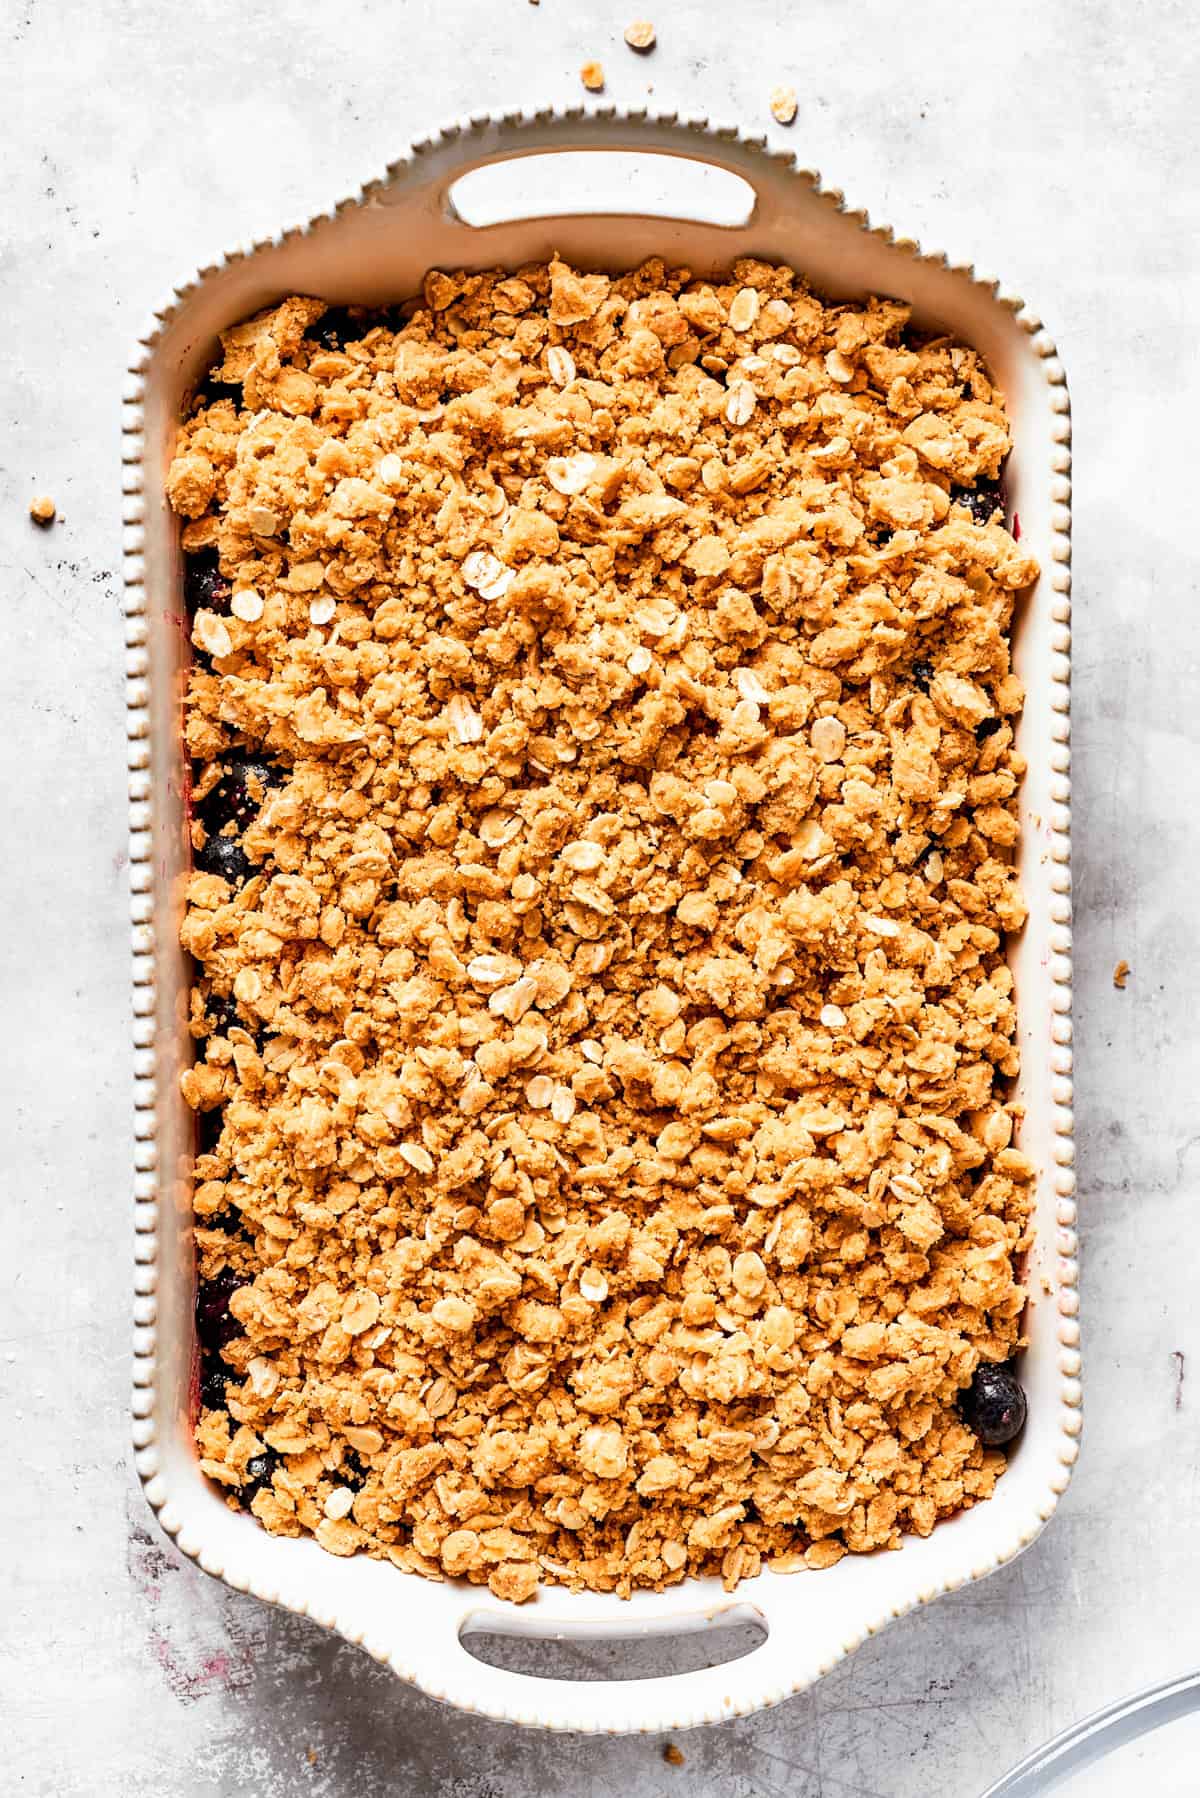 Buttery oats in a baking dish.